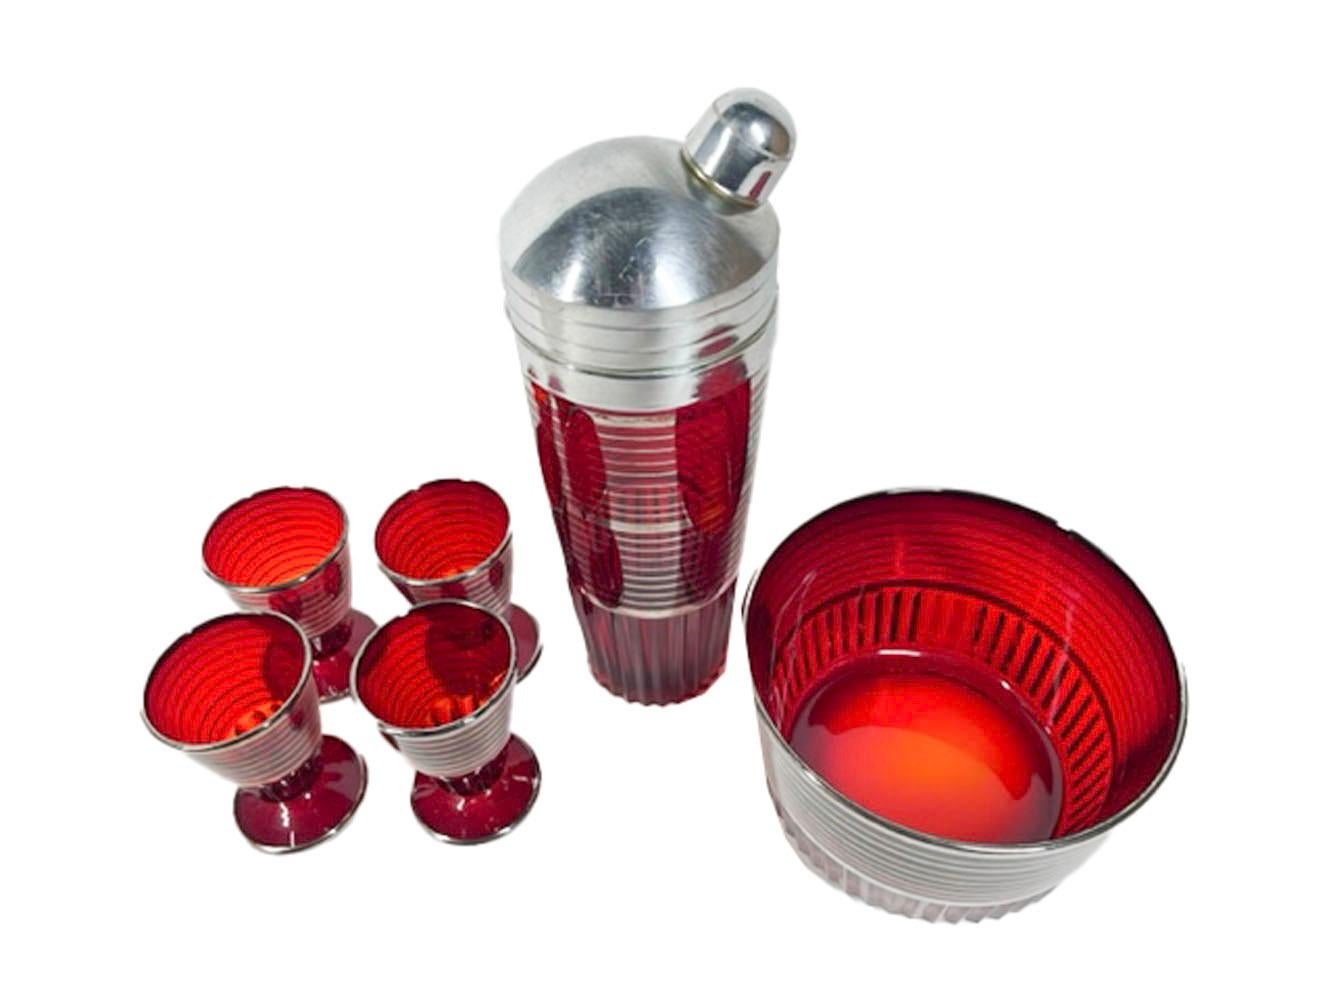 American Art Deco, Paden City Glass, Cocktail Shaker Set in Ruby Glass W/Silver Bands For Sale